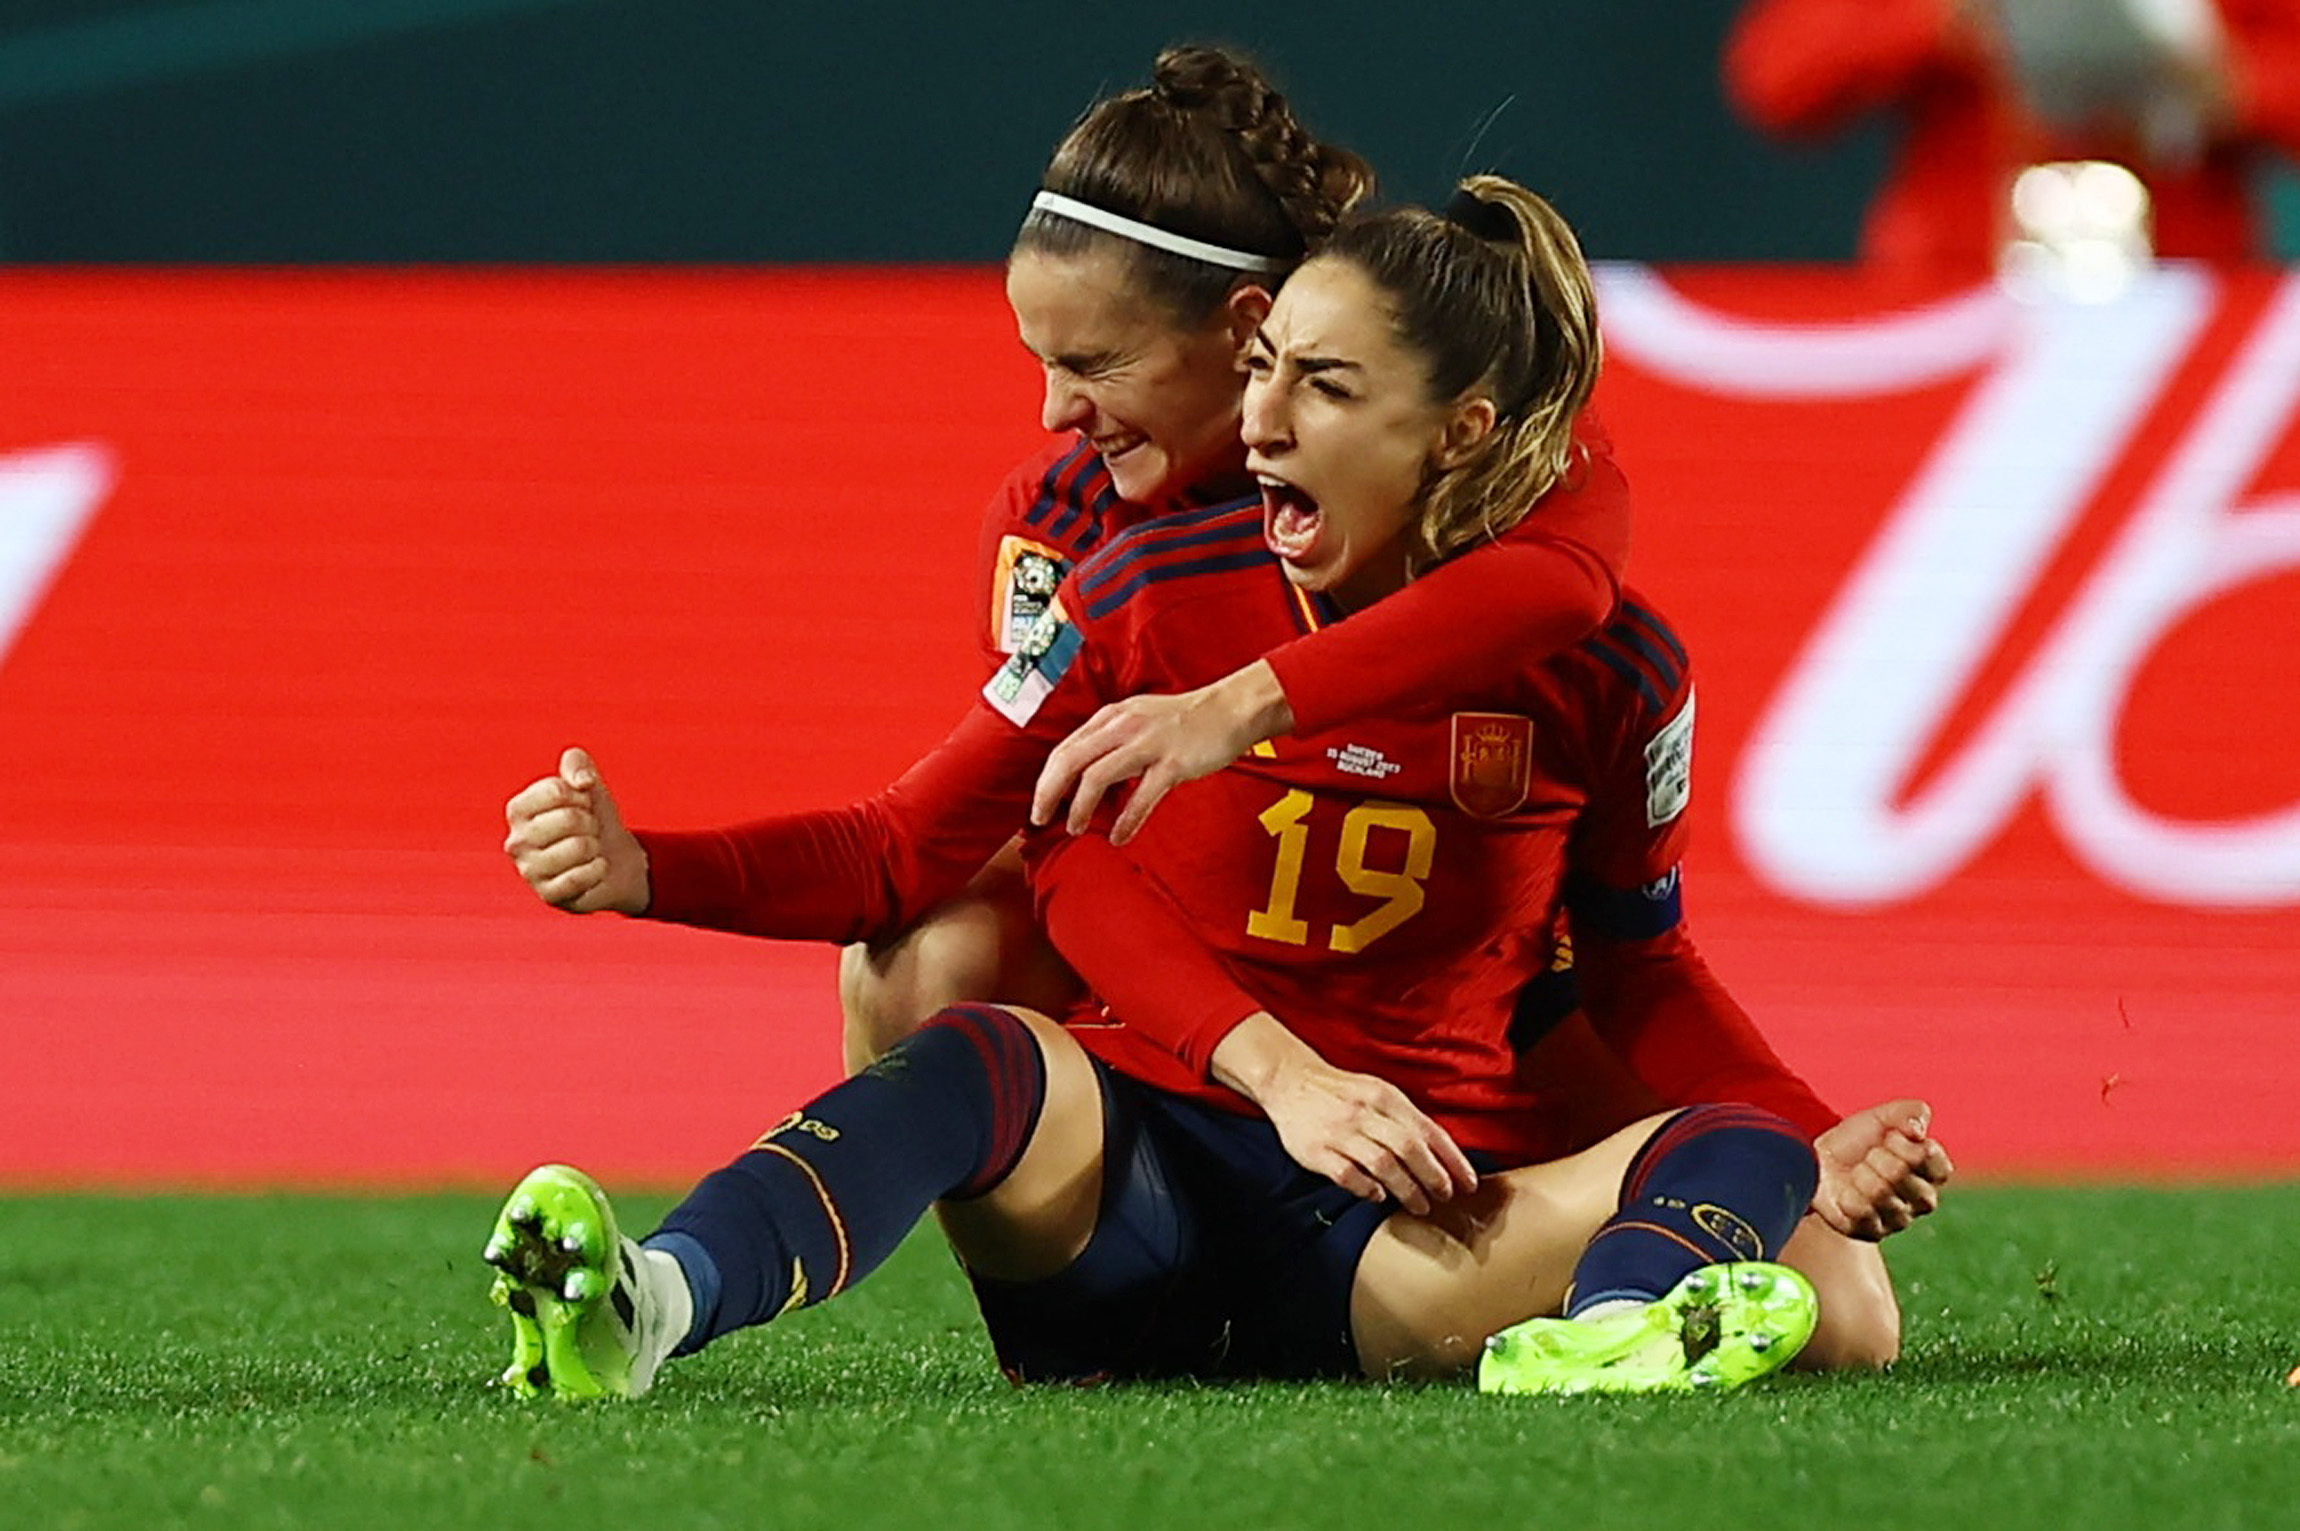 Olga Carmona scores late goal as Spain beats Sweden to advance to Womens World Cup final